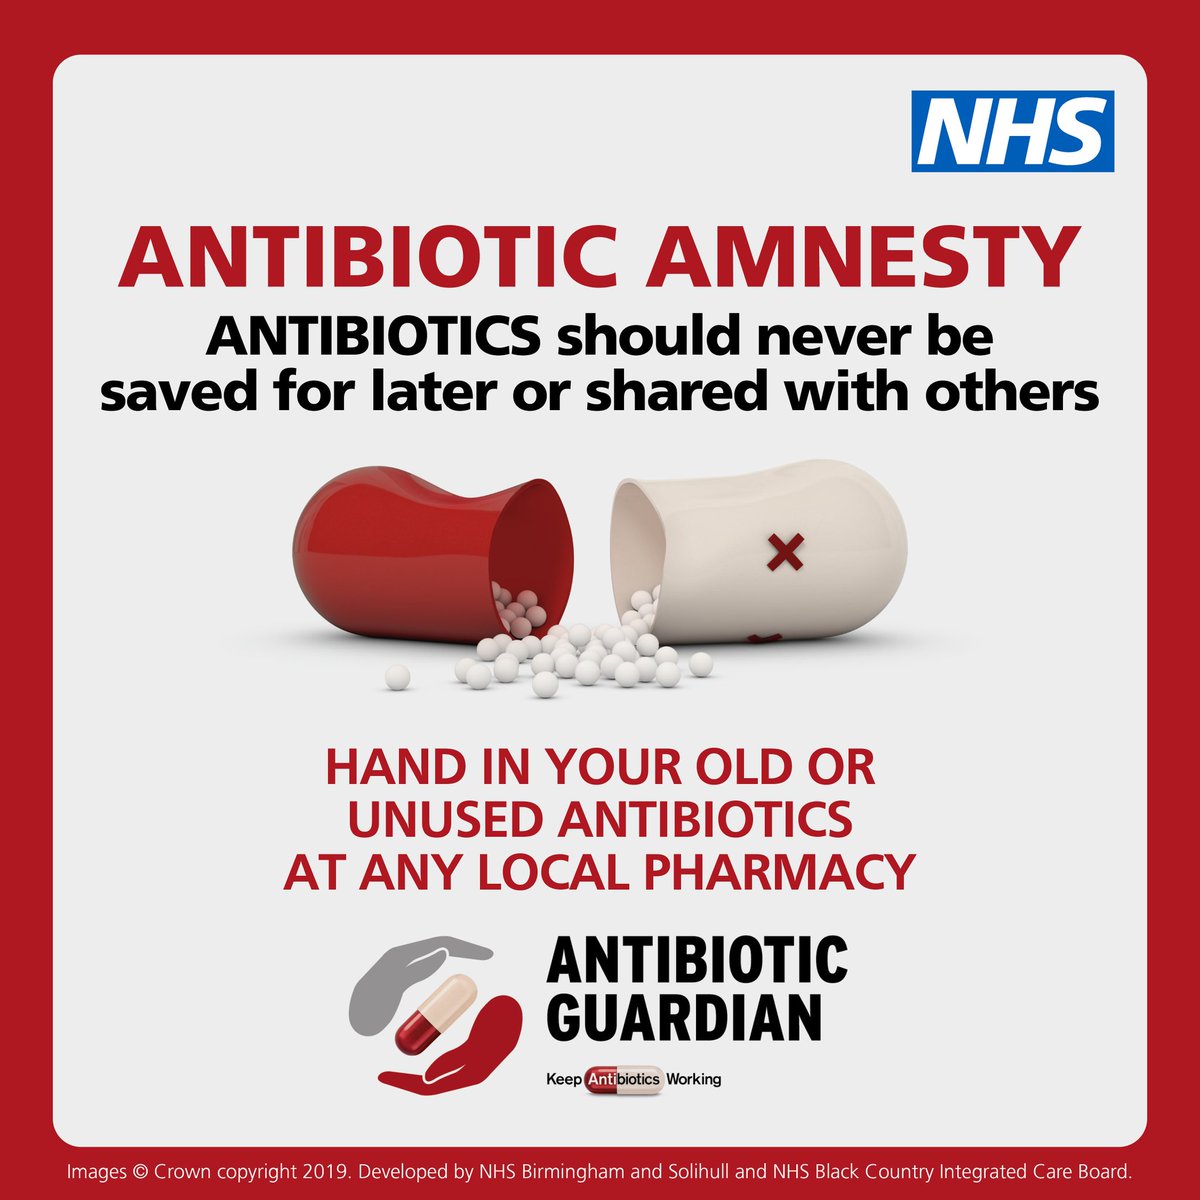 Did you know that antibiotics should never be saved for later or shared with others? 💊 If you have old or unused antibiotics at home, join our Antibiotic Amnesty and take them to your nearest pharmacy. ➡️ Learn more about our #antibioticamnesty: bit.ly/3FLG7qJ